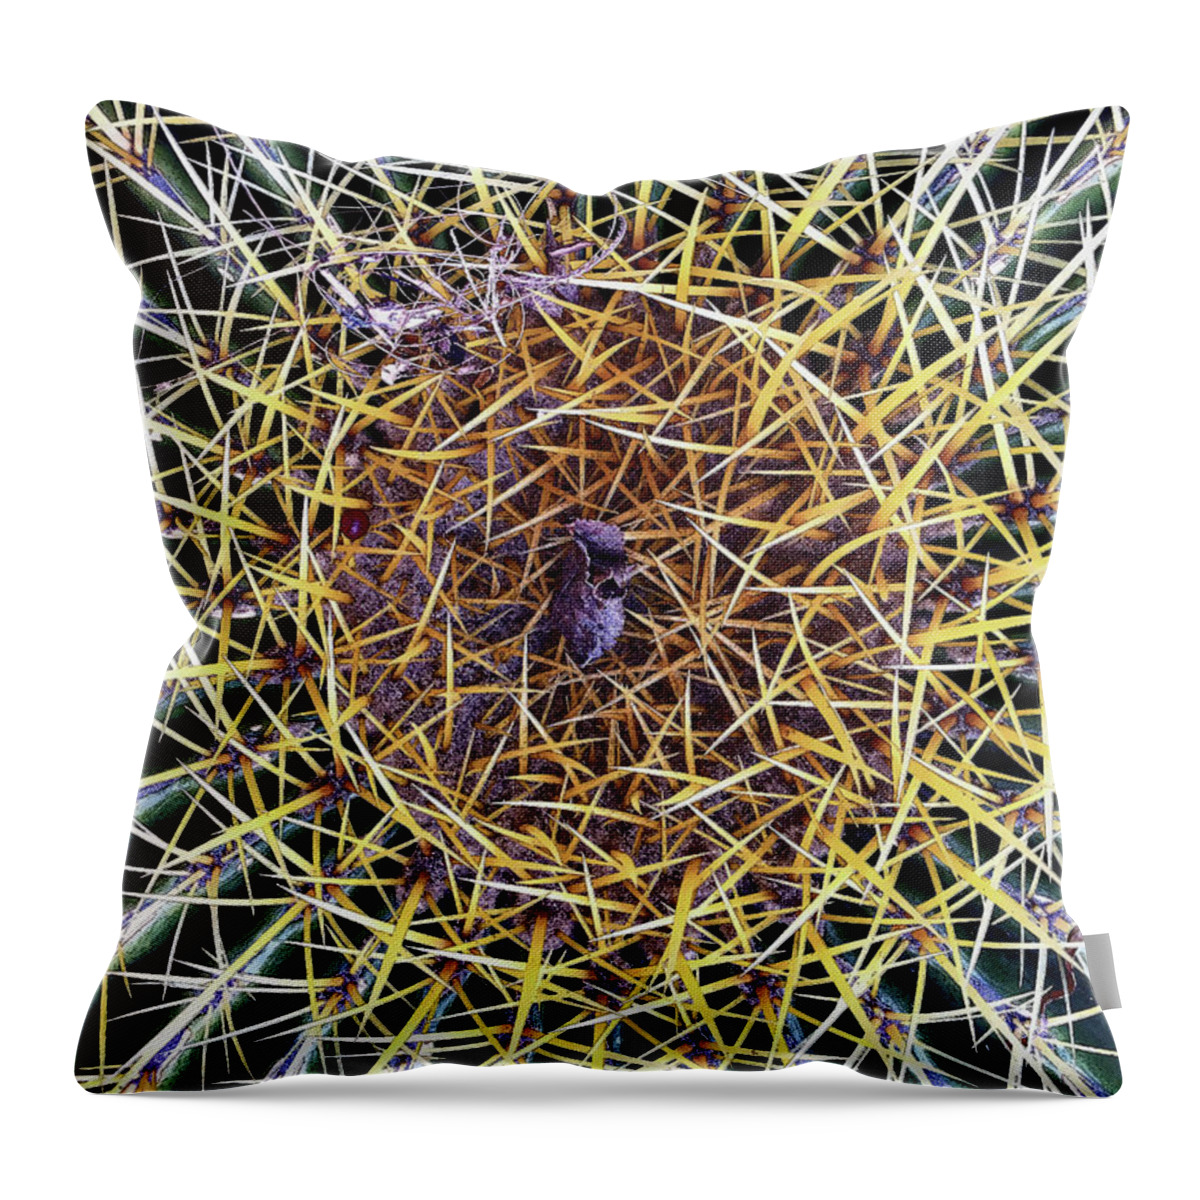 Cactus Throw Pillow featuring the photograph Thorny by Matt Cegelis